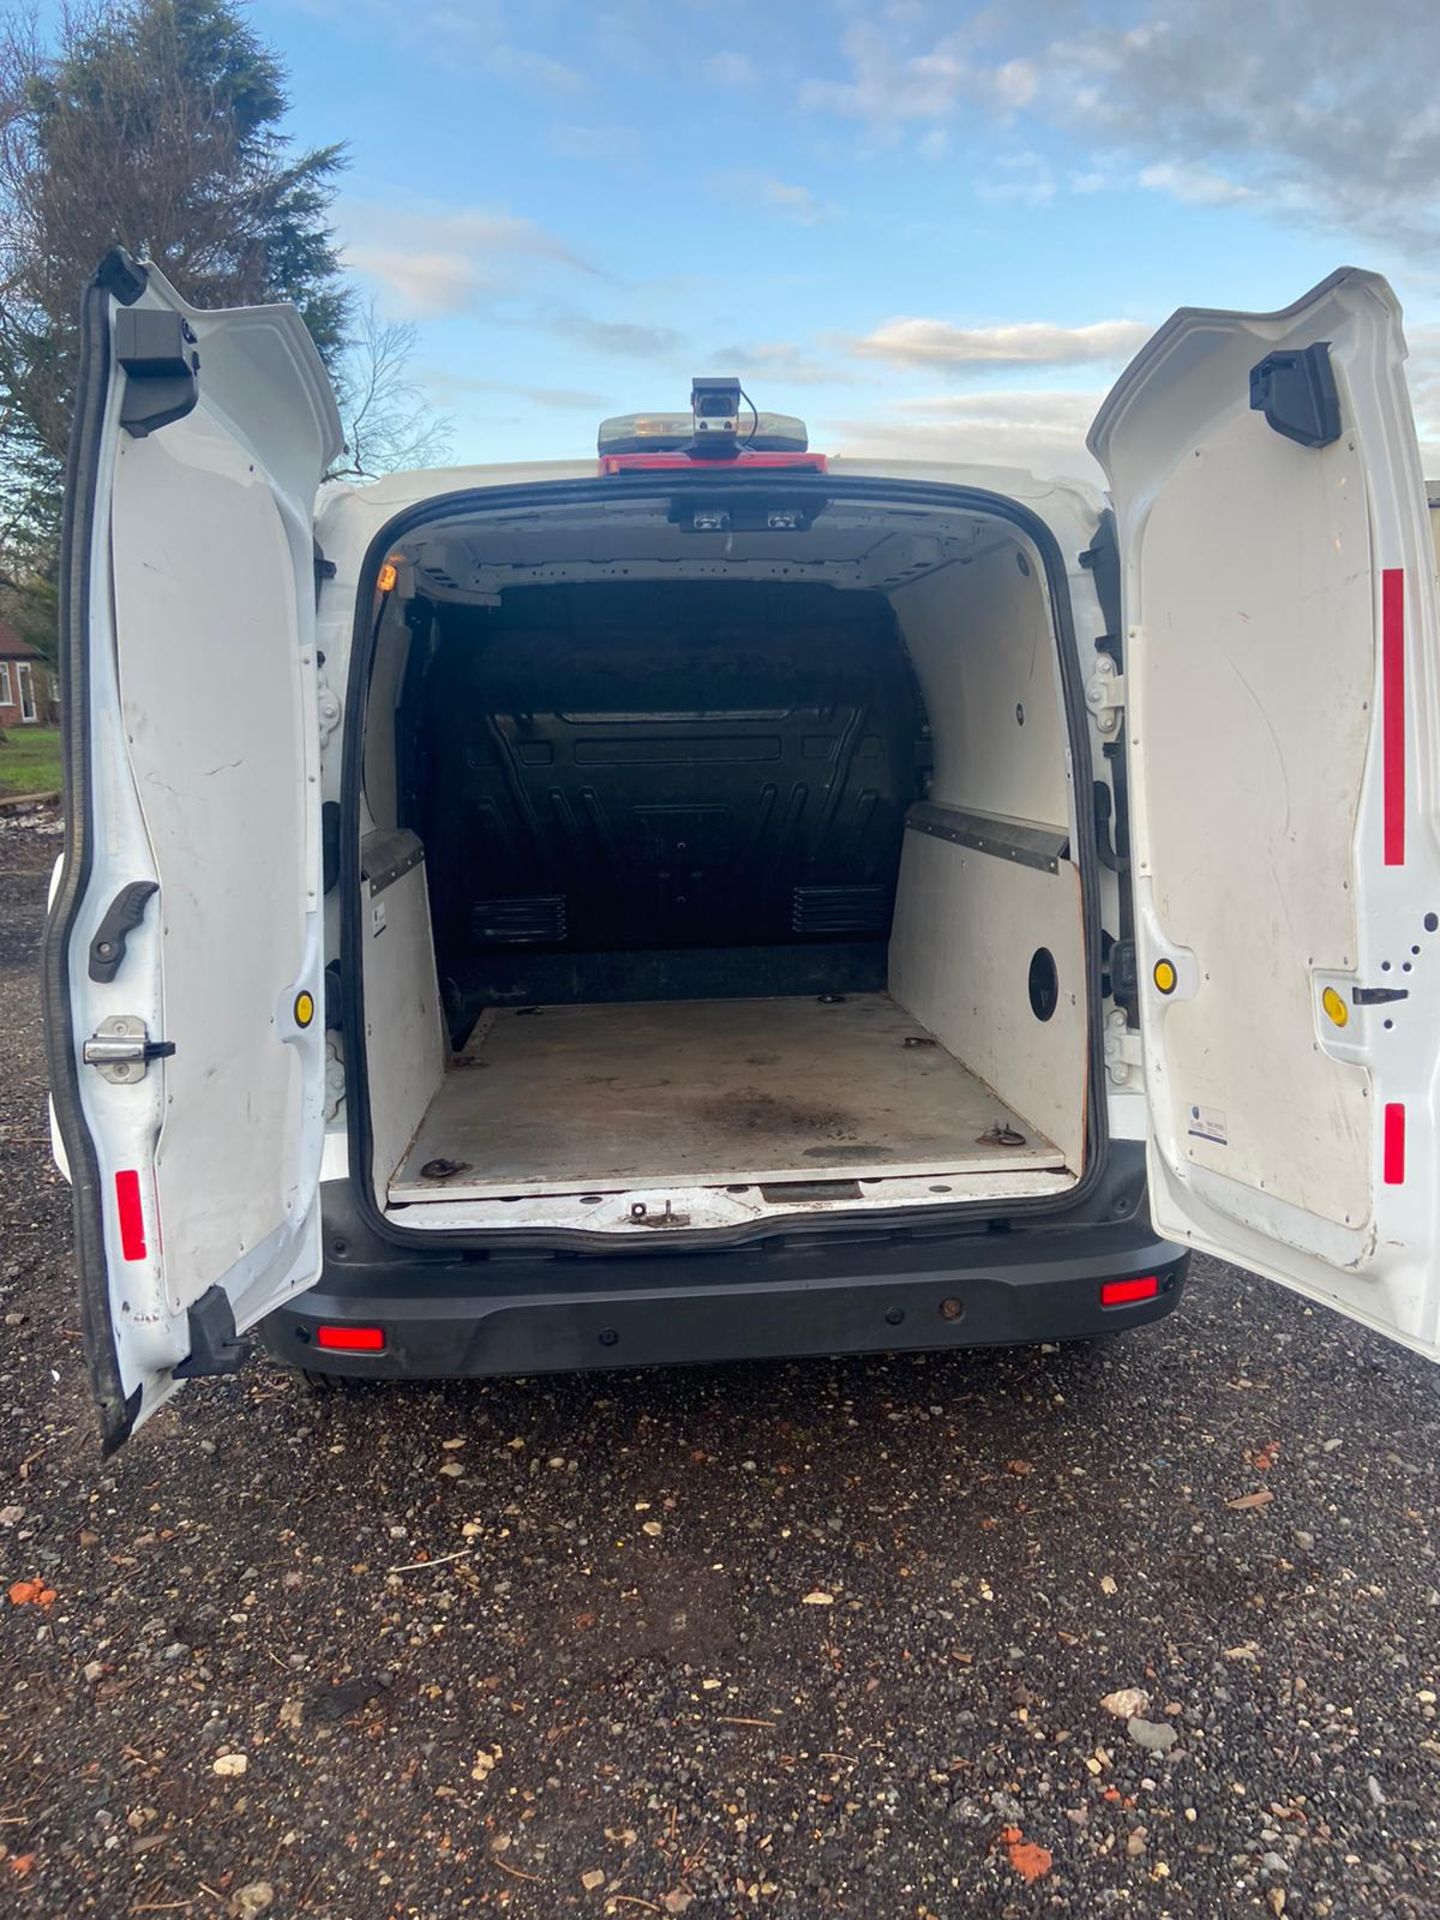 2015/15 REG FORD TRANSIT CONNECT 200 ECONETIC 1.6 DIESEL WHITE PANEL VAN, SHOWING 0 FORMER KEEPERS - Image 9 of 11